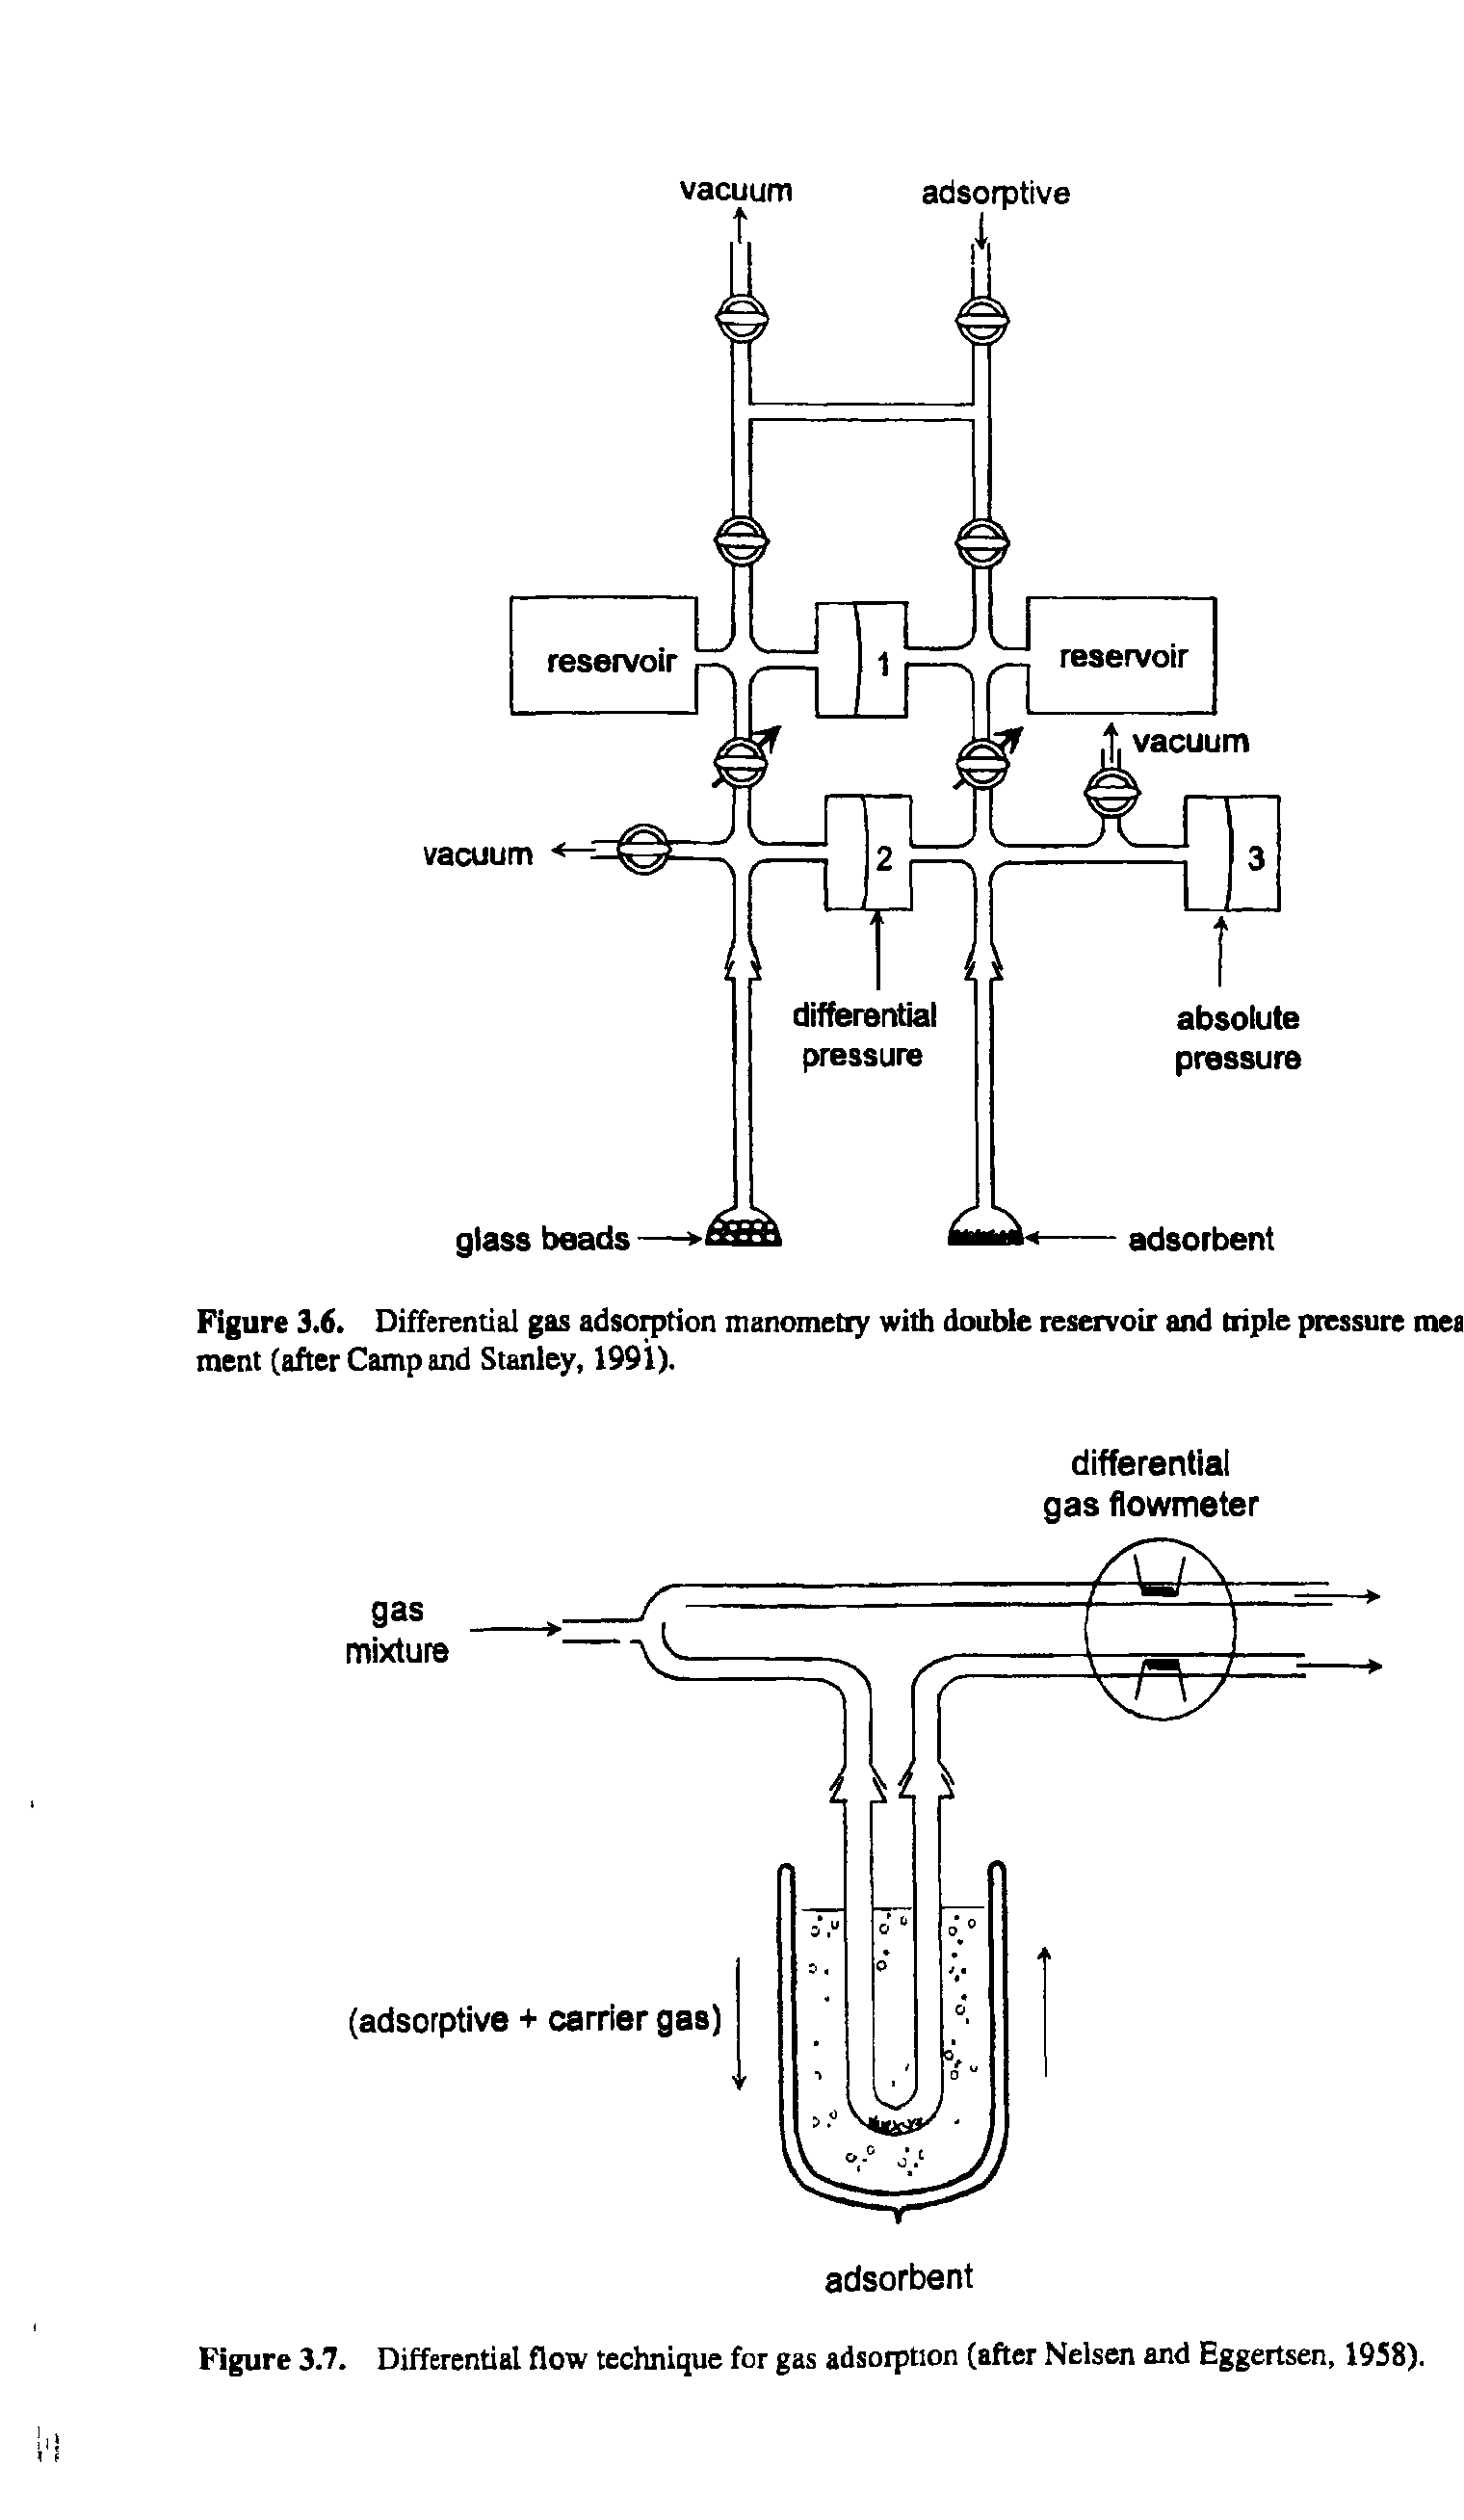 Figure 3.7. Differential flow technique for gas adsorption (after Nelsen and Eggertsen, 1958).